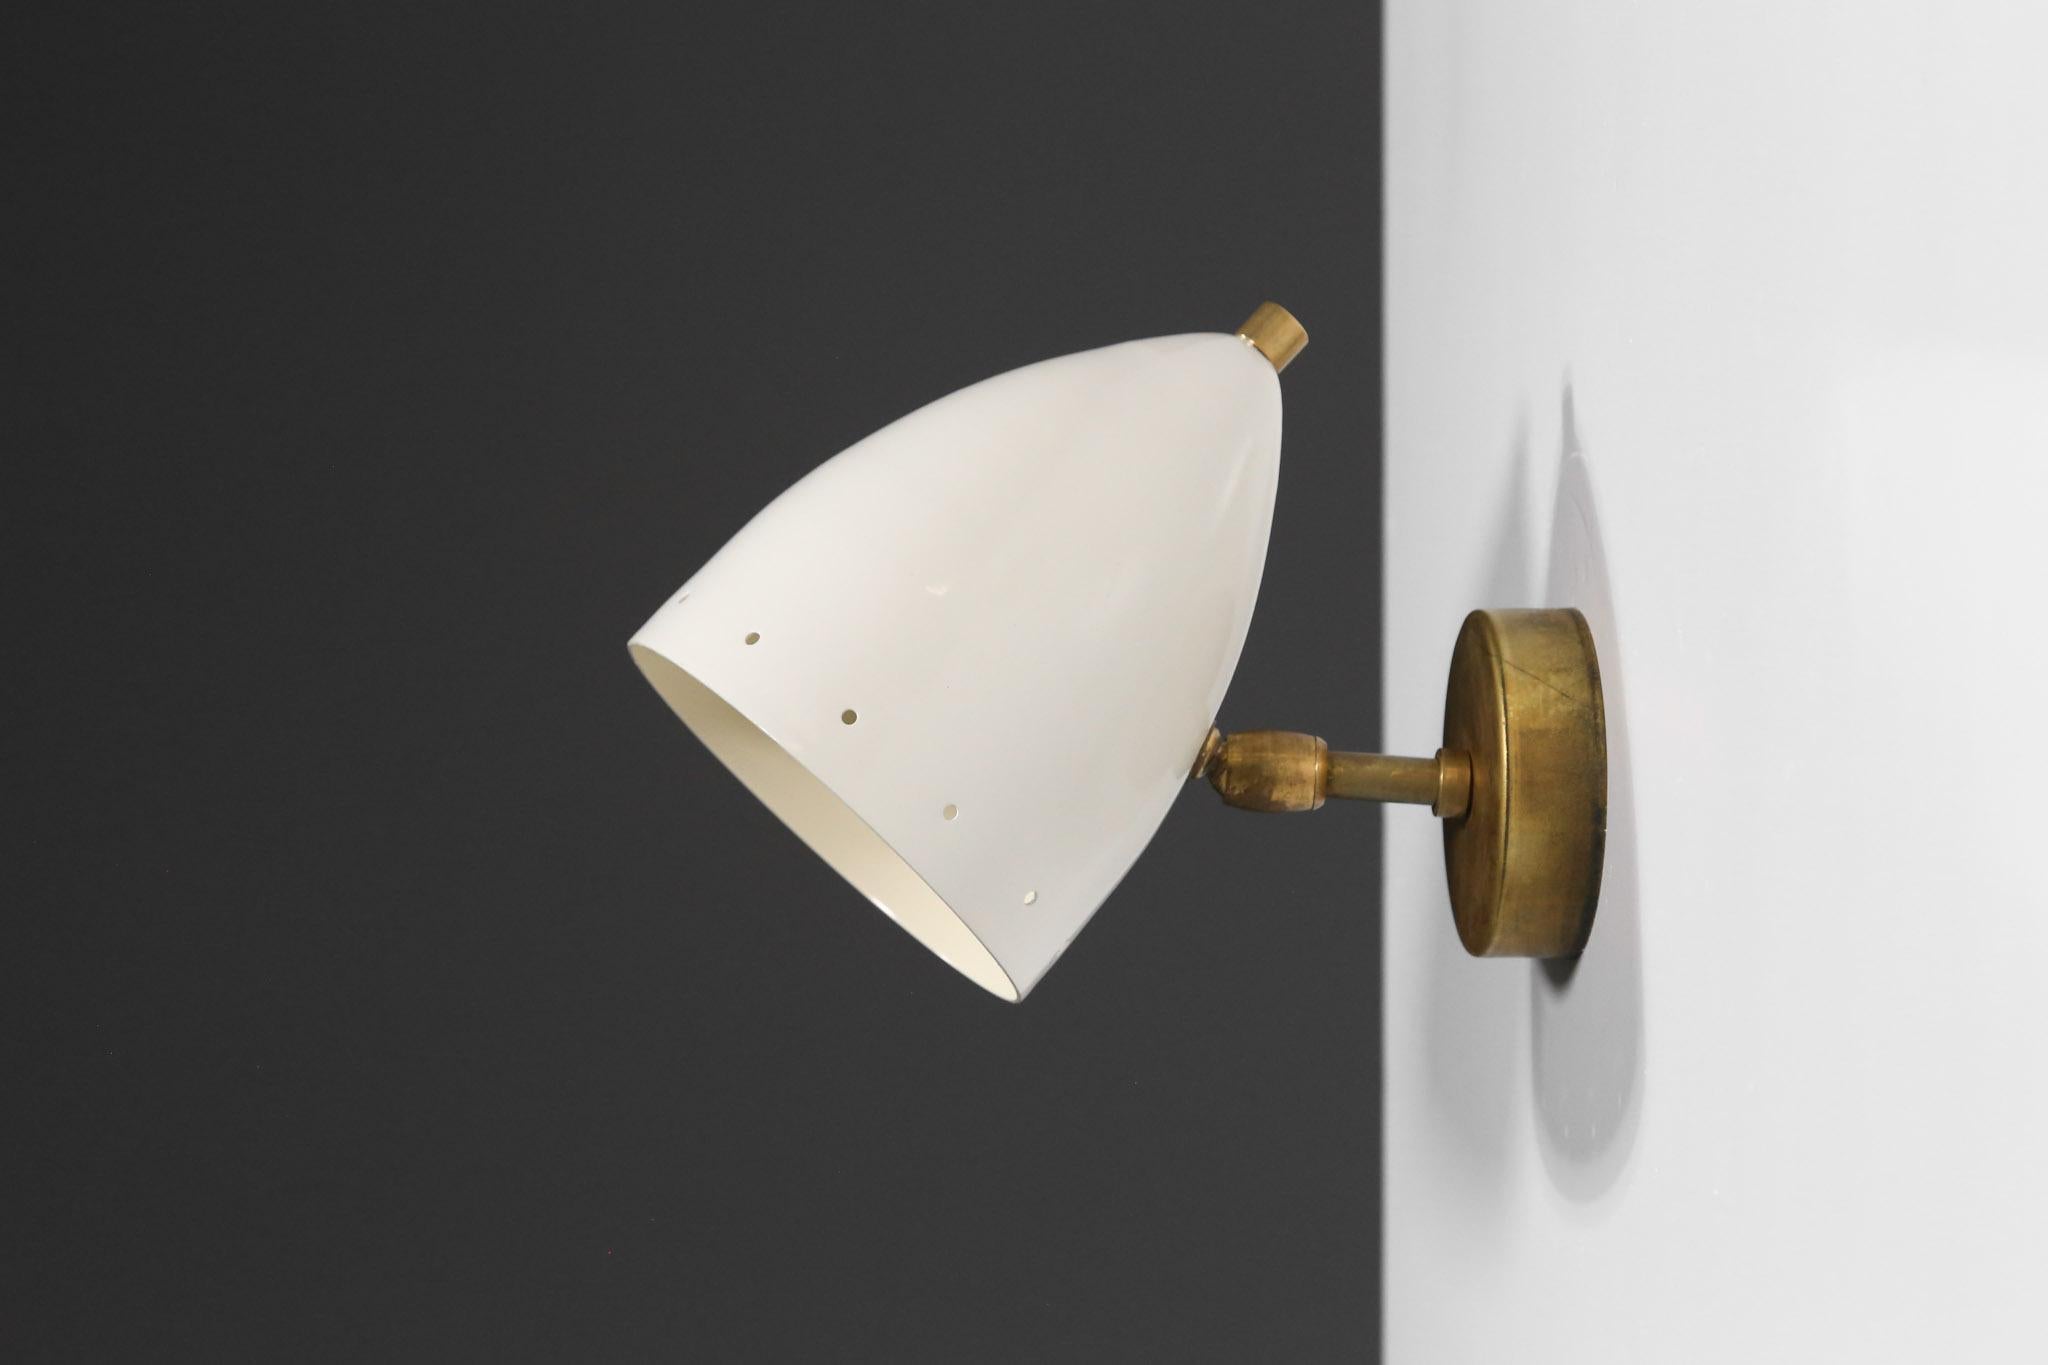 Italian modern diabolo sconces. The lampshades are adjustable and can light in different directions. E14 bulbs per lampshade. Beautiful sculptural and decorative wall light style Stilnovo.
Could be used as a bedside light.